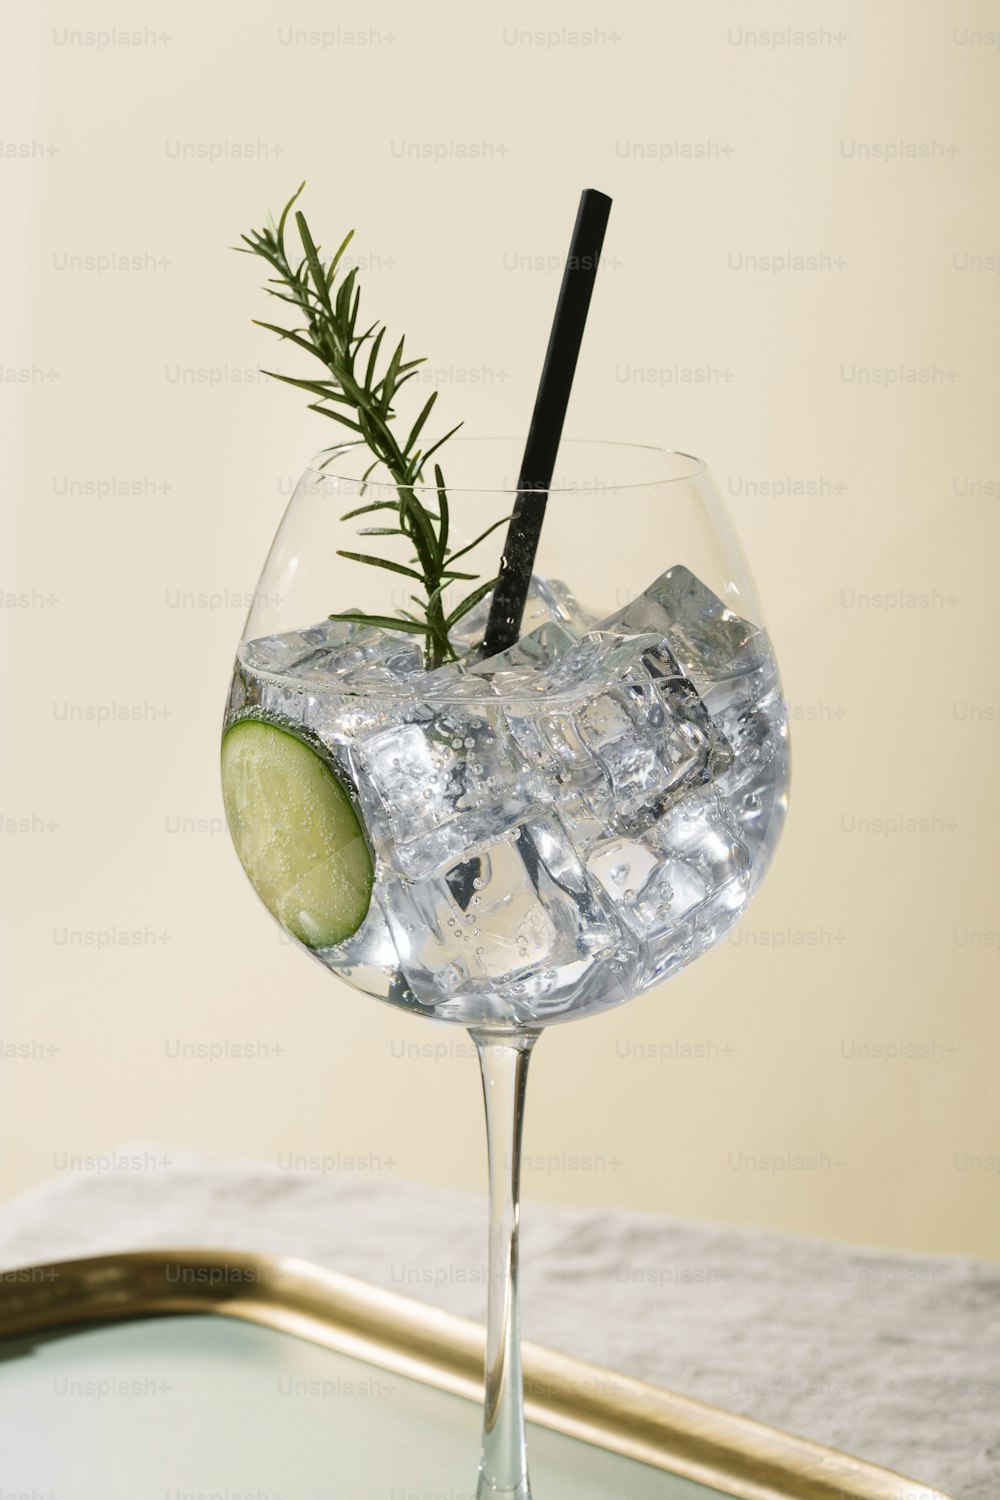 Gin tonic, an international aperitif cocktail garnished with cucumber and rosemary